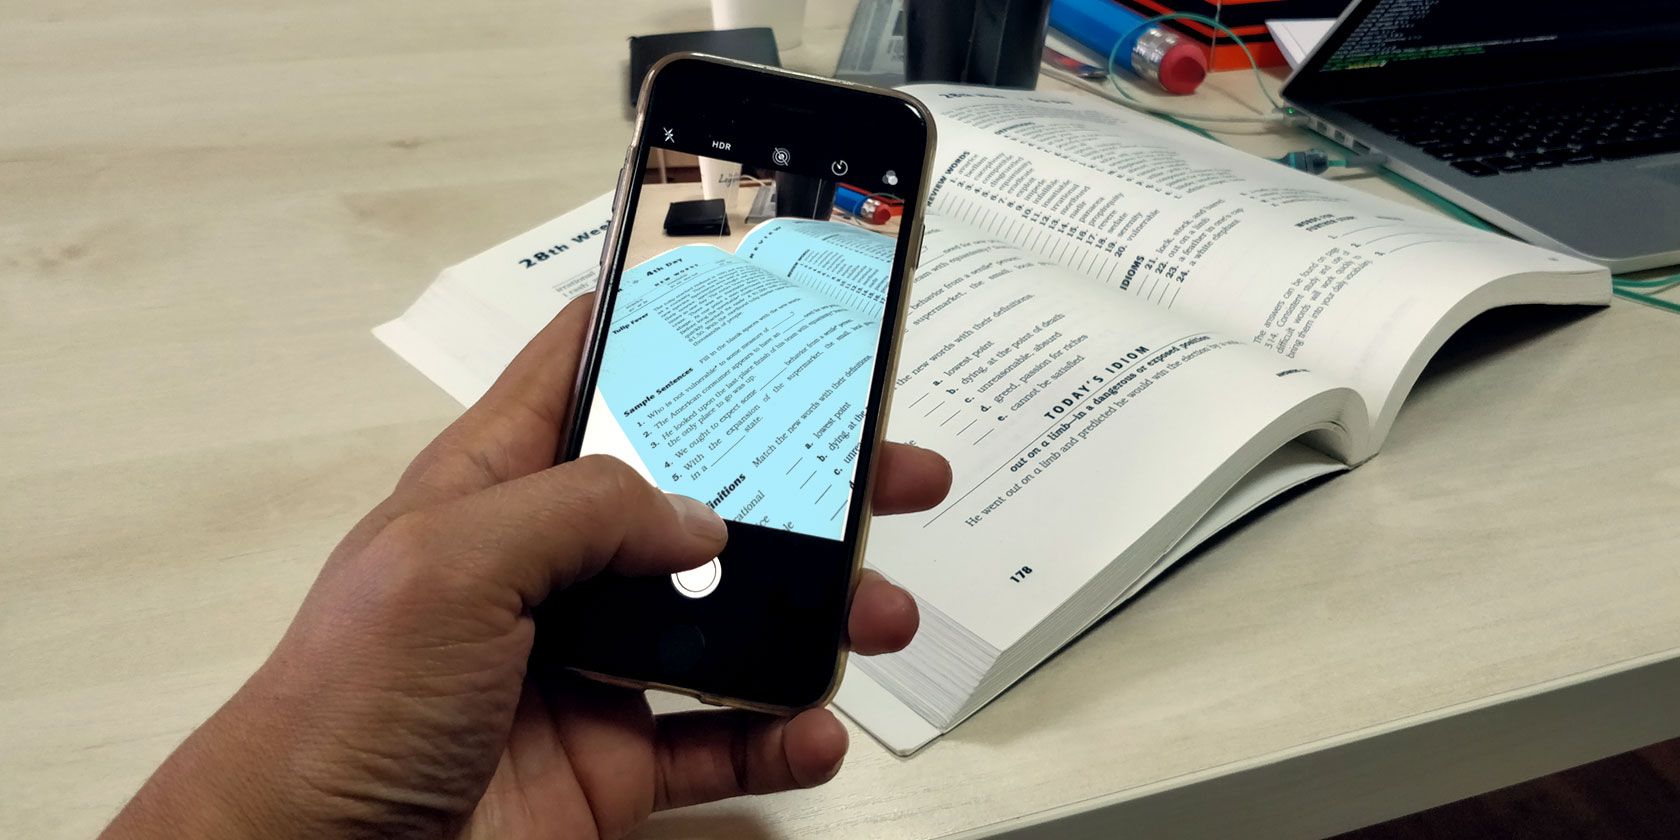 Smartphone scanning documents in an app.